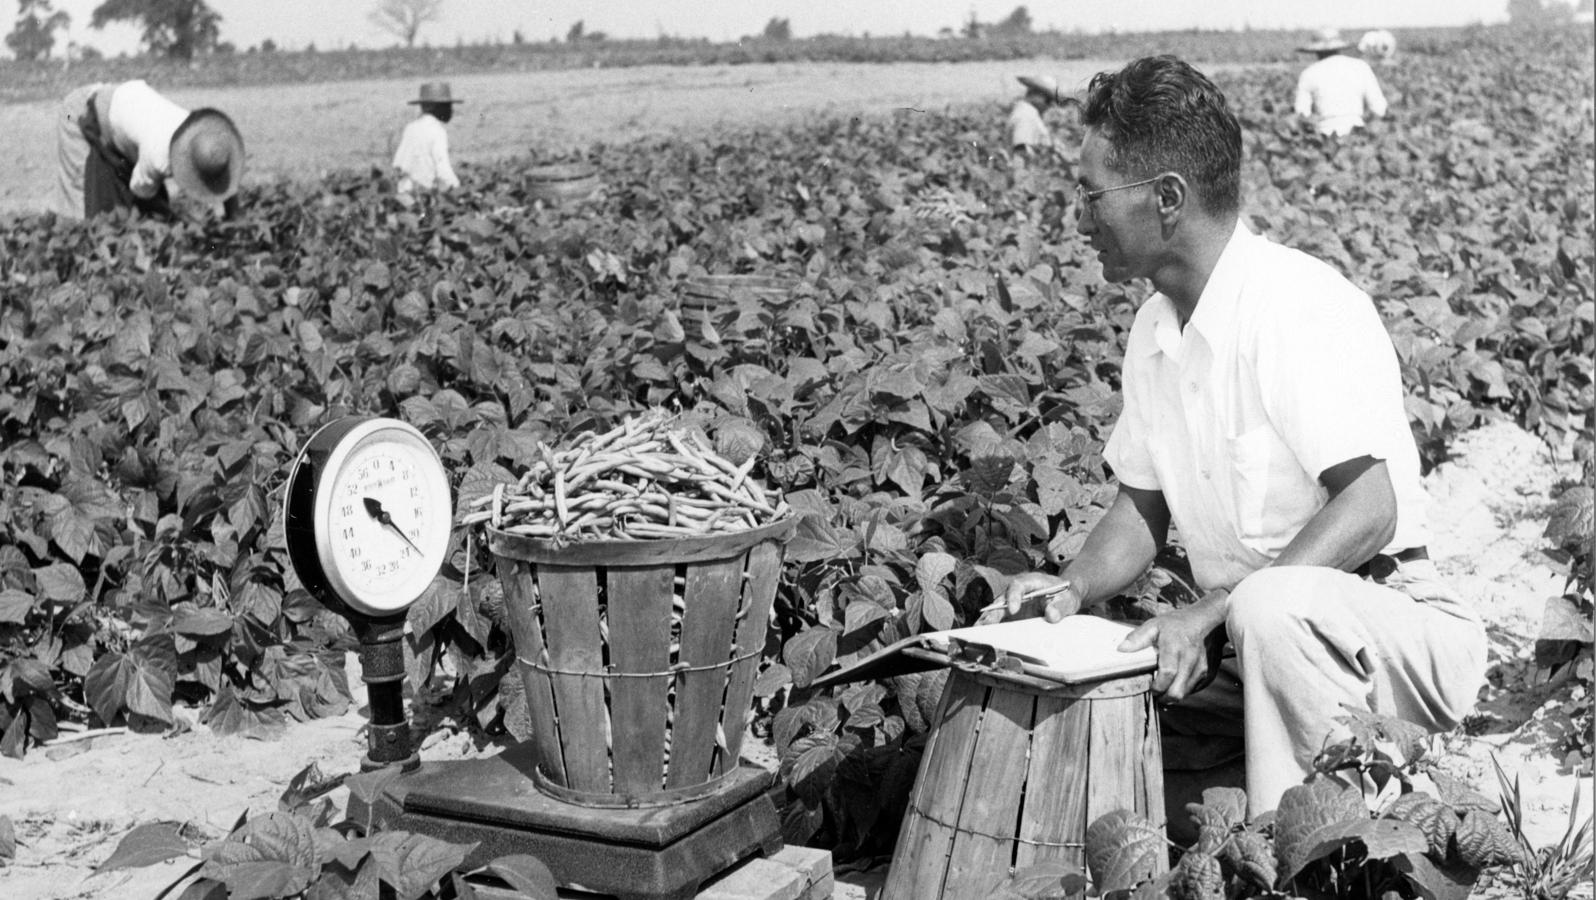 A man sits on a crate to weigh vegetables in a field, black and white photo